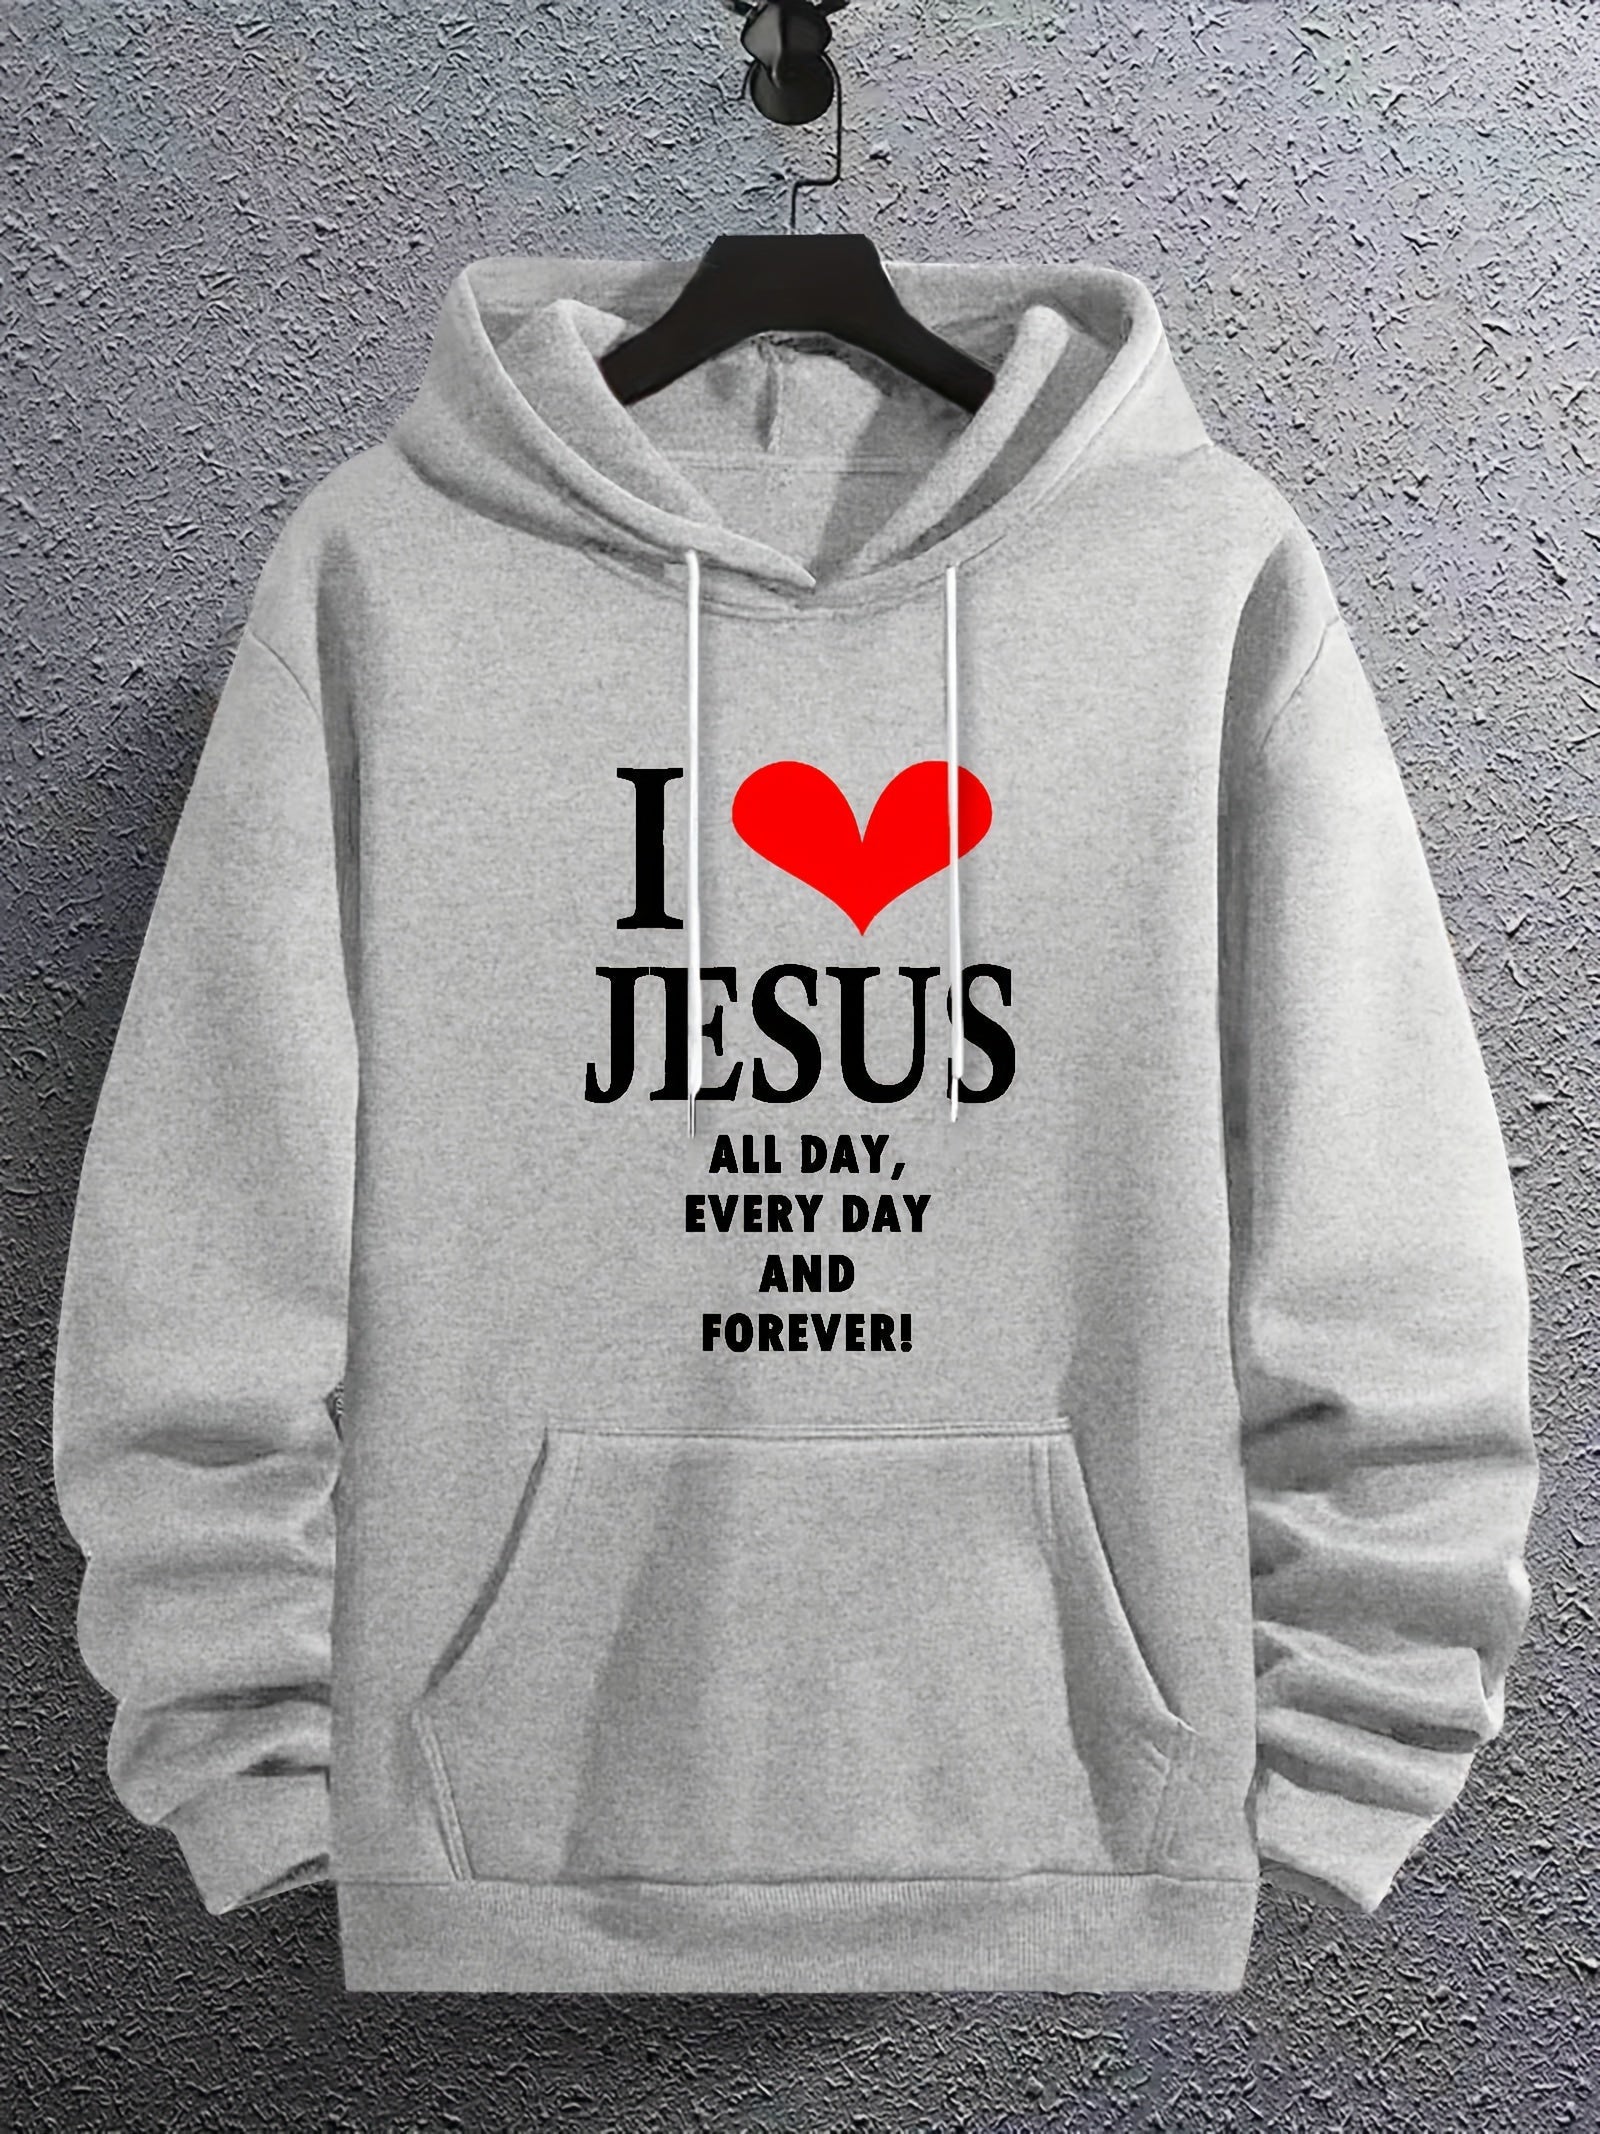 I Love Jesus All Day Every Day And Forever Men's Christian Pullover Hooded Sweatshirt claimedbygoddesigns